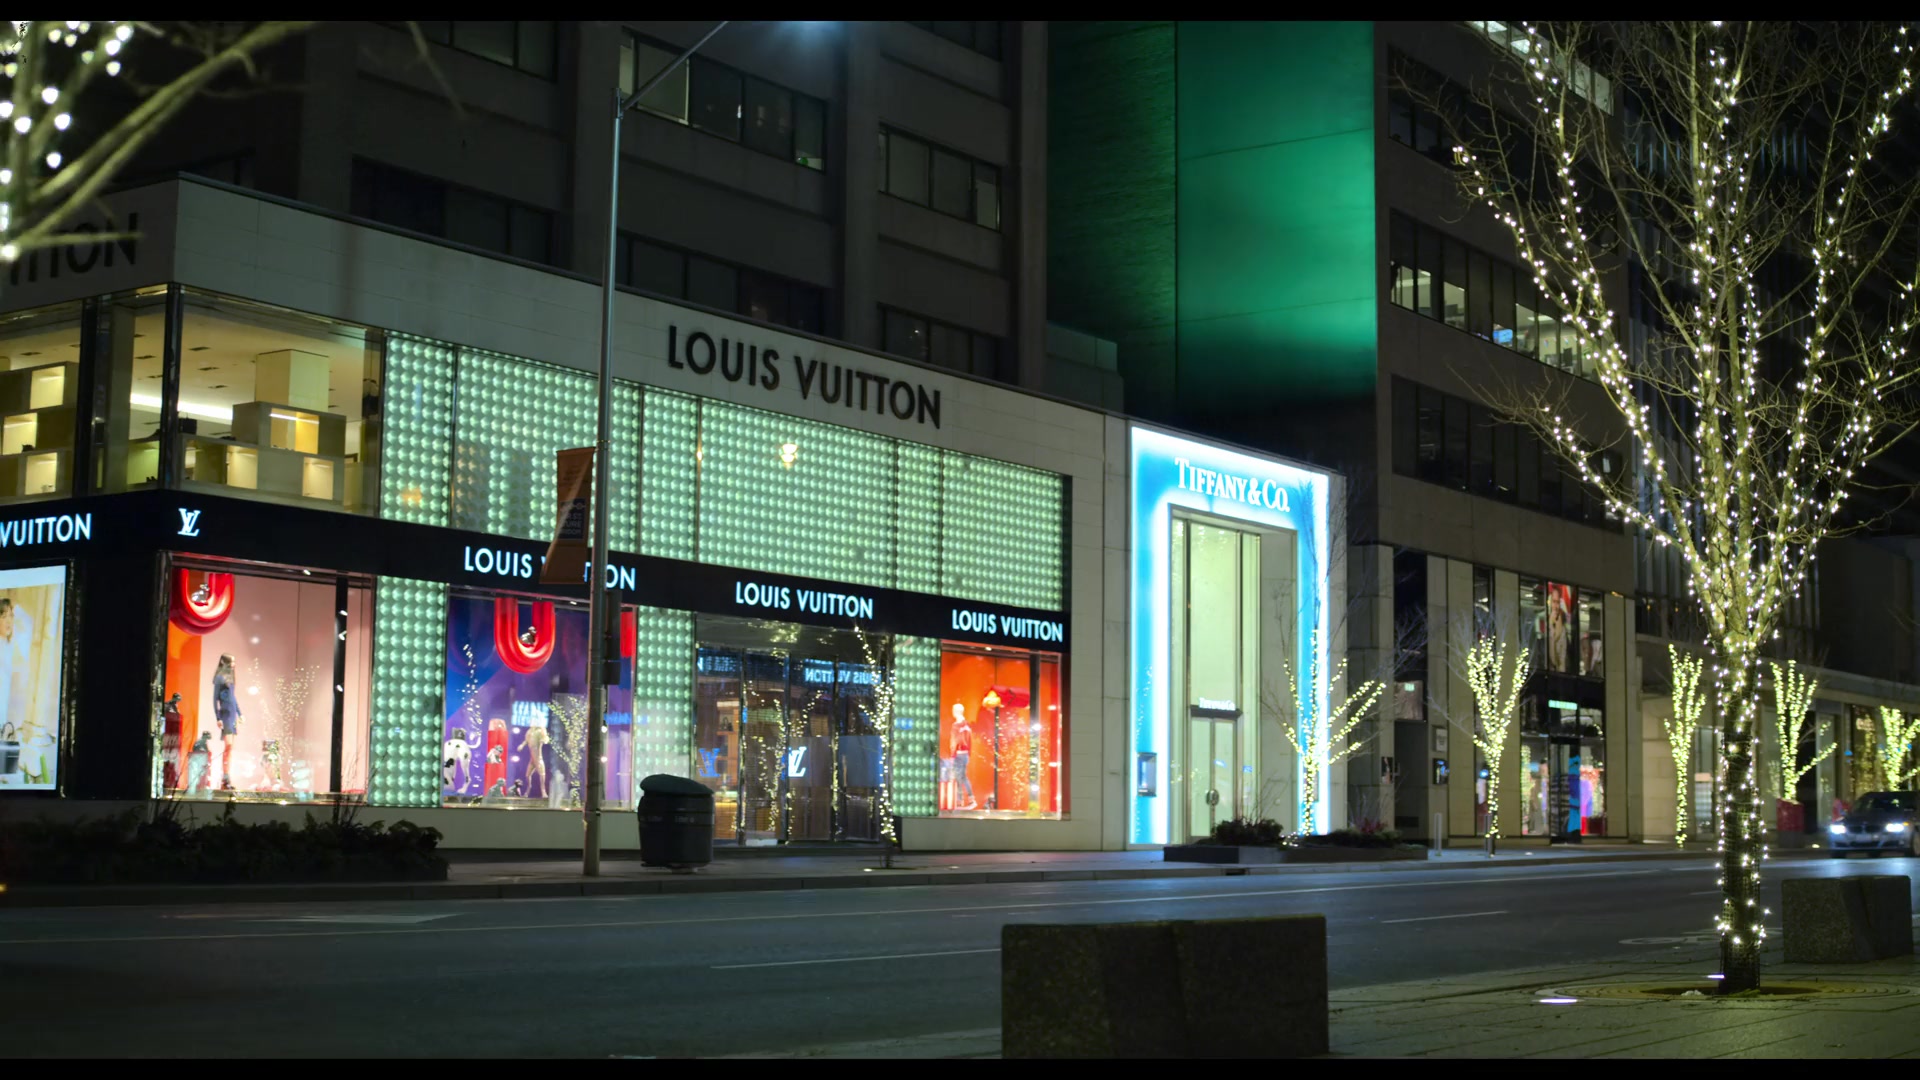 Louis Vuitton and Tiffany & Co. Stores in The Christmas Chronicles (2018)